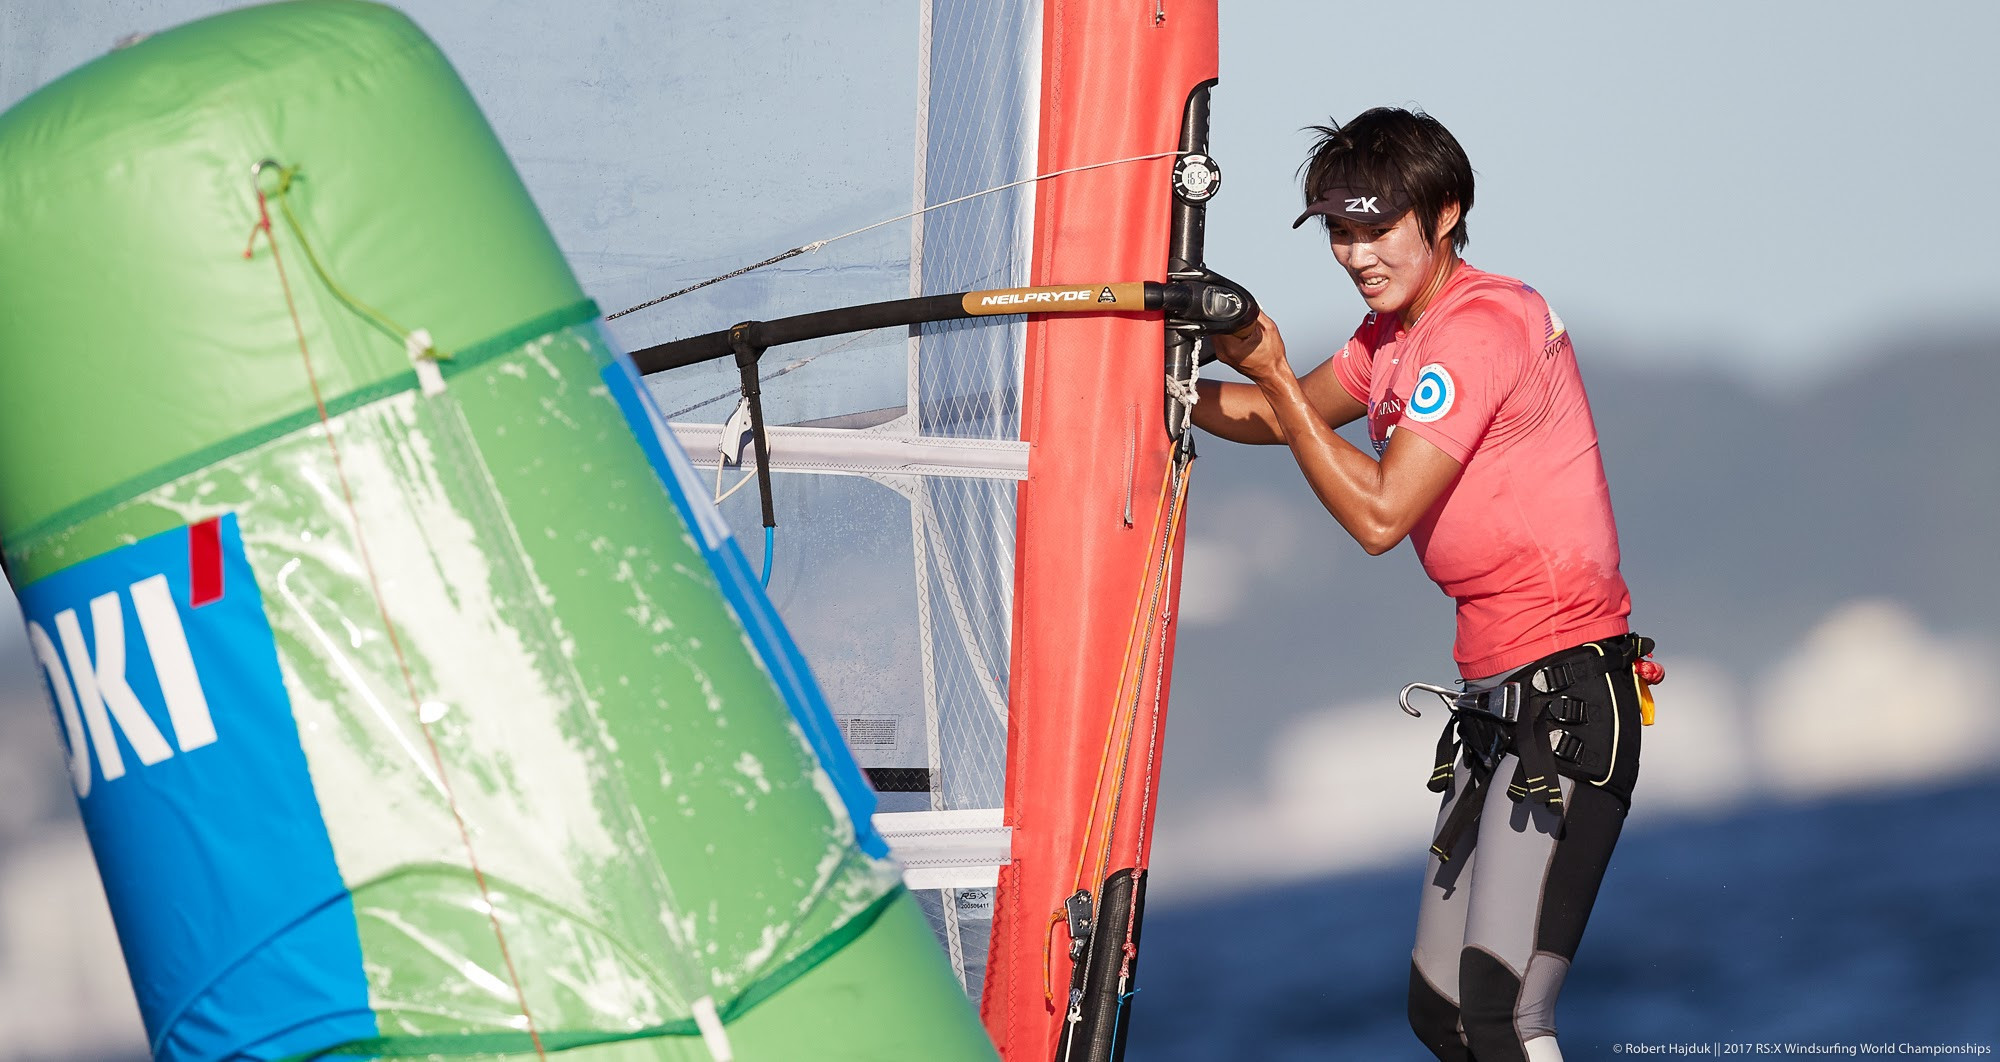 Chen poised for gold at RS:X Windsurfing World Championships as Ye and Sanz Lanz contest men's title 